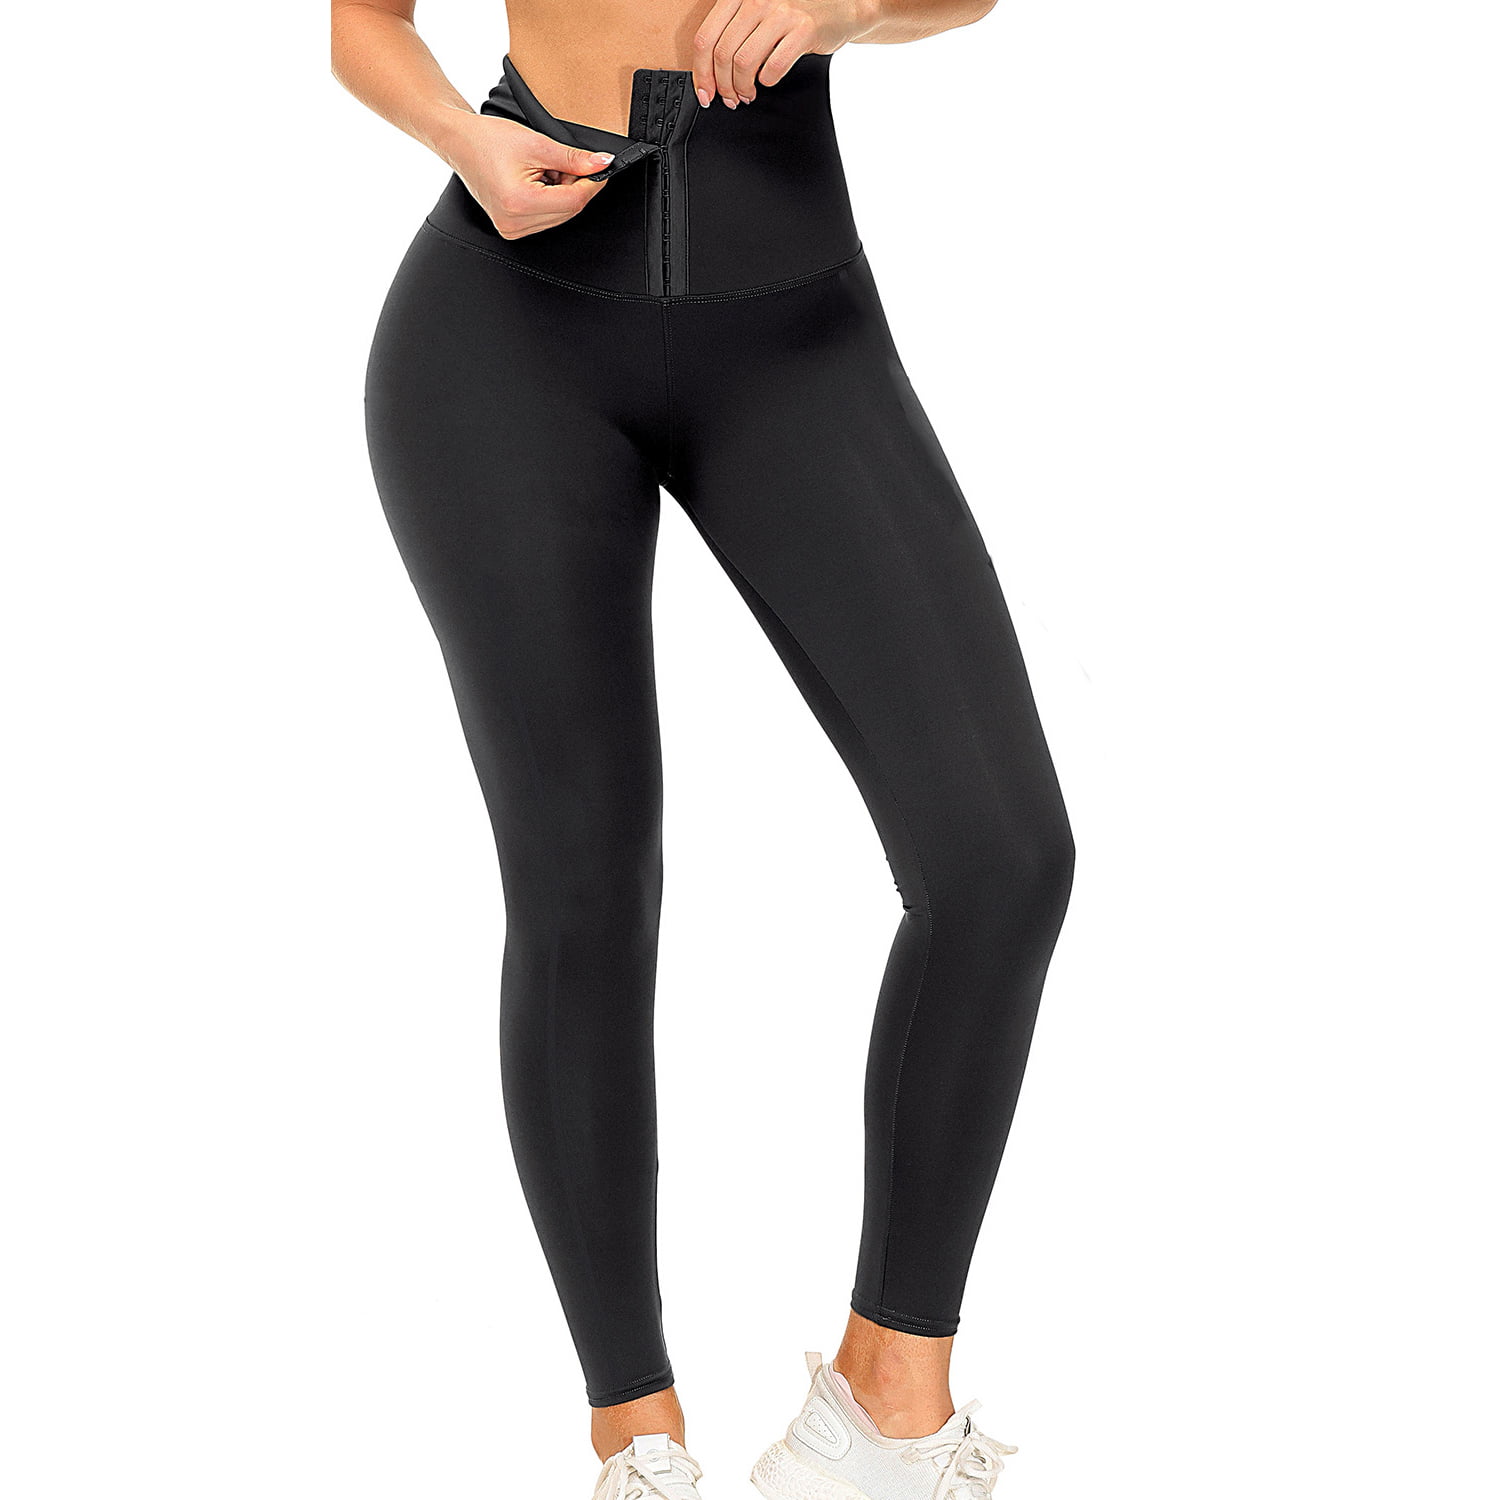 Buy MOOSLOVER Women Corset High Waisted Leggings with Pockets Tummy Control  Body Shaper Yoga Pants, #1 Black-871, S at